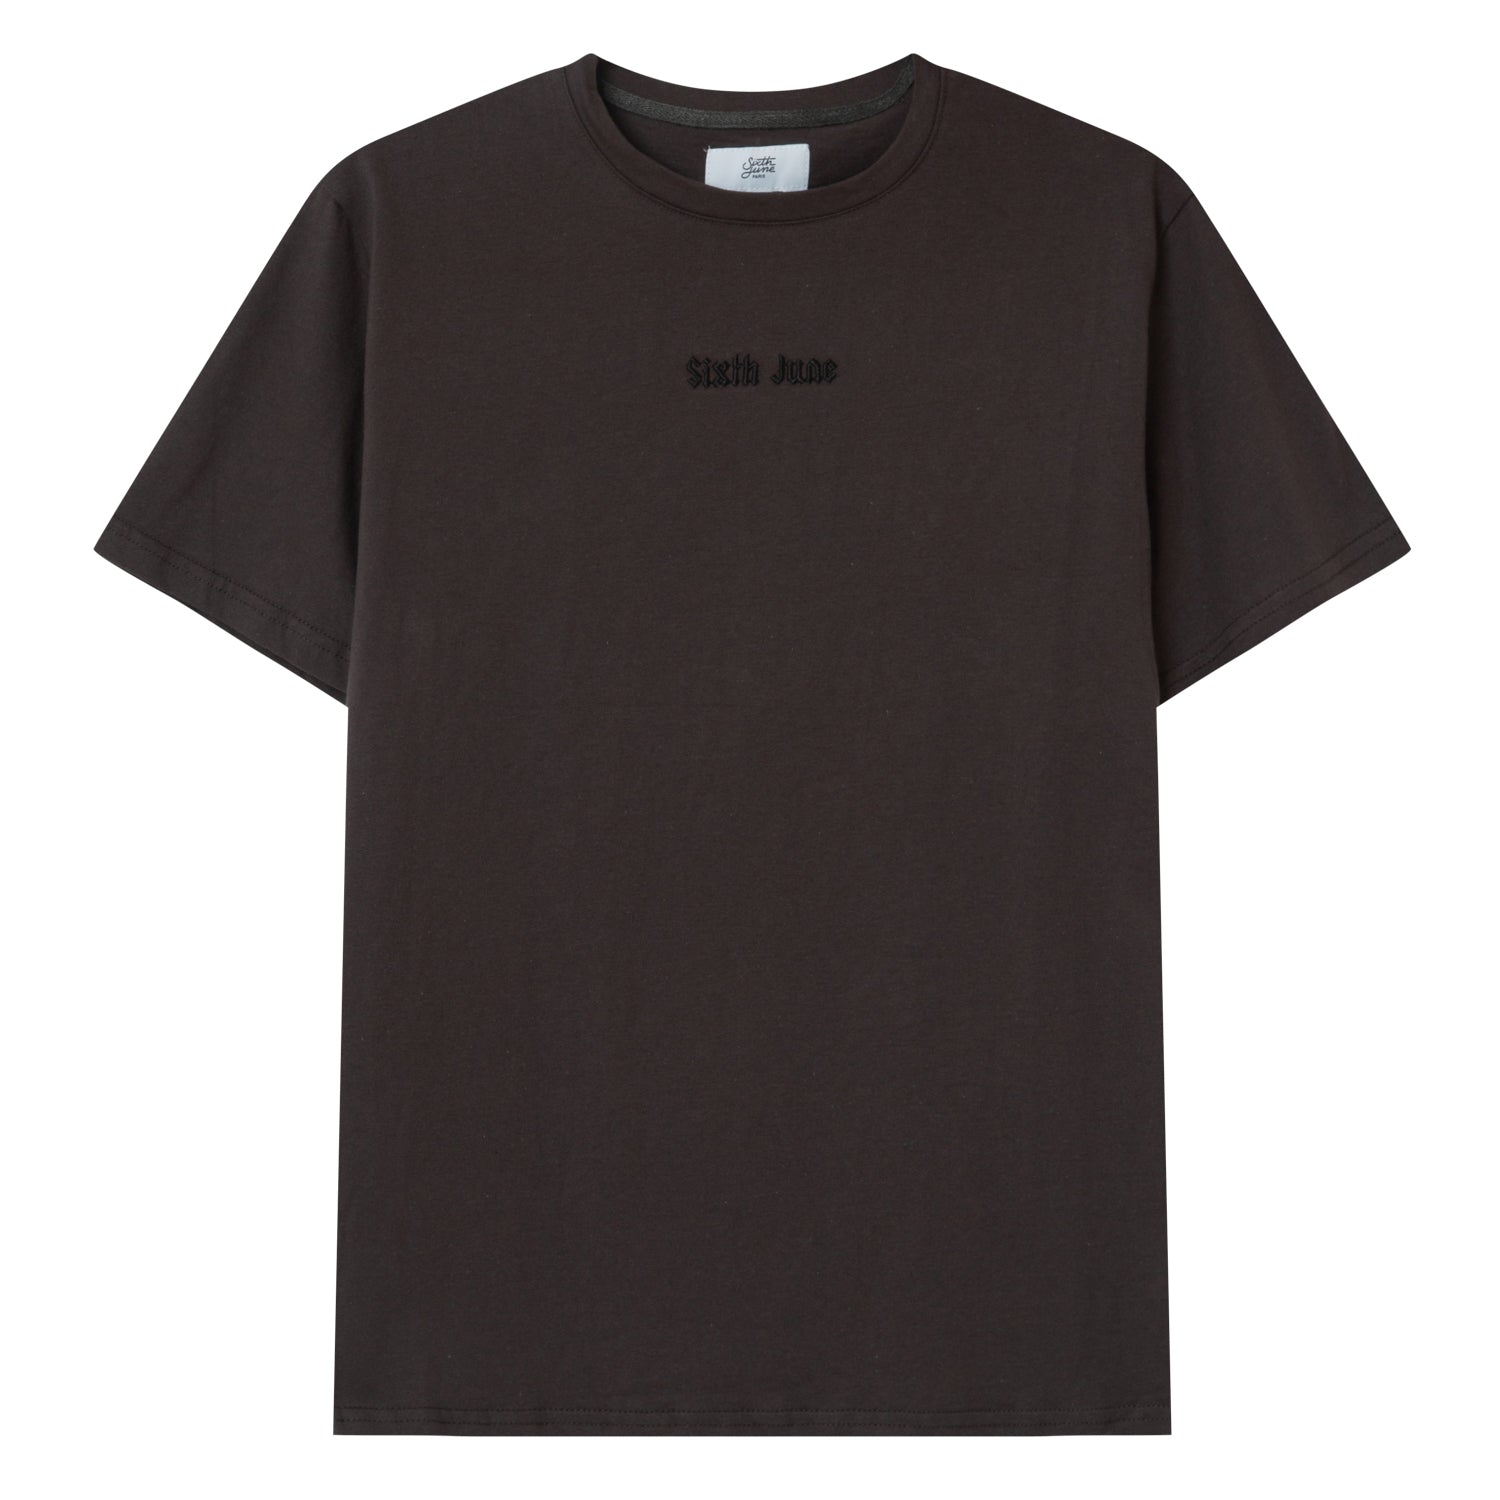 Quote embroidery t-shirt Dark grey